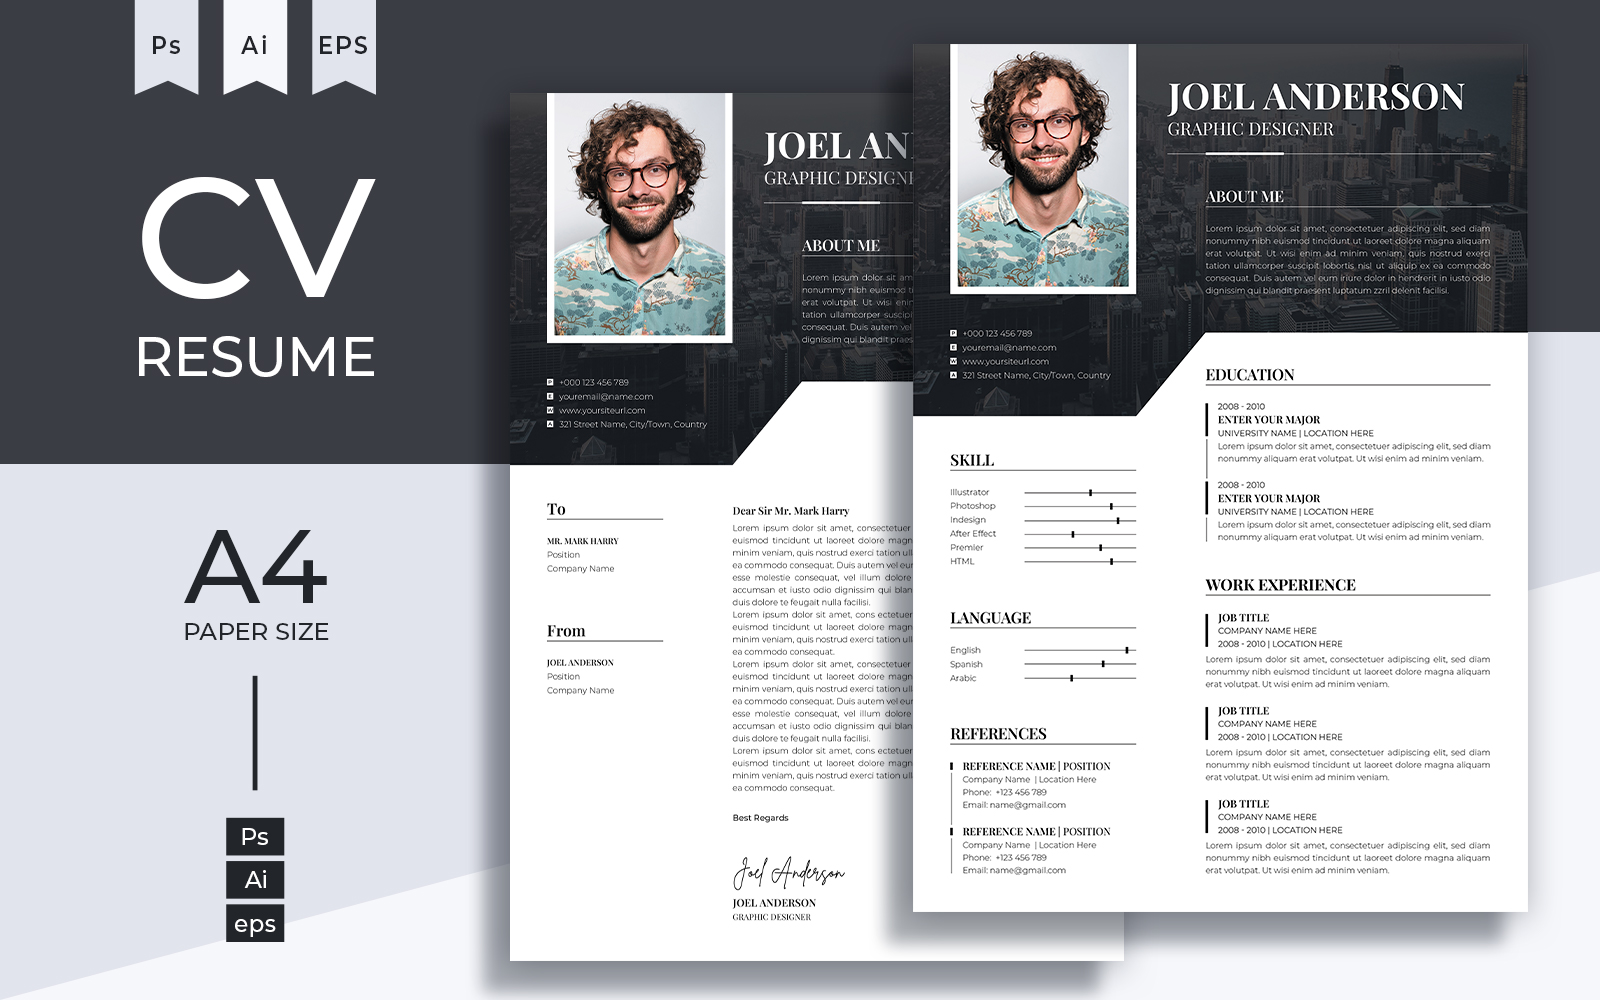 Professional CV Resume Template And Cover Letter